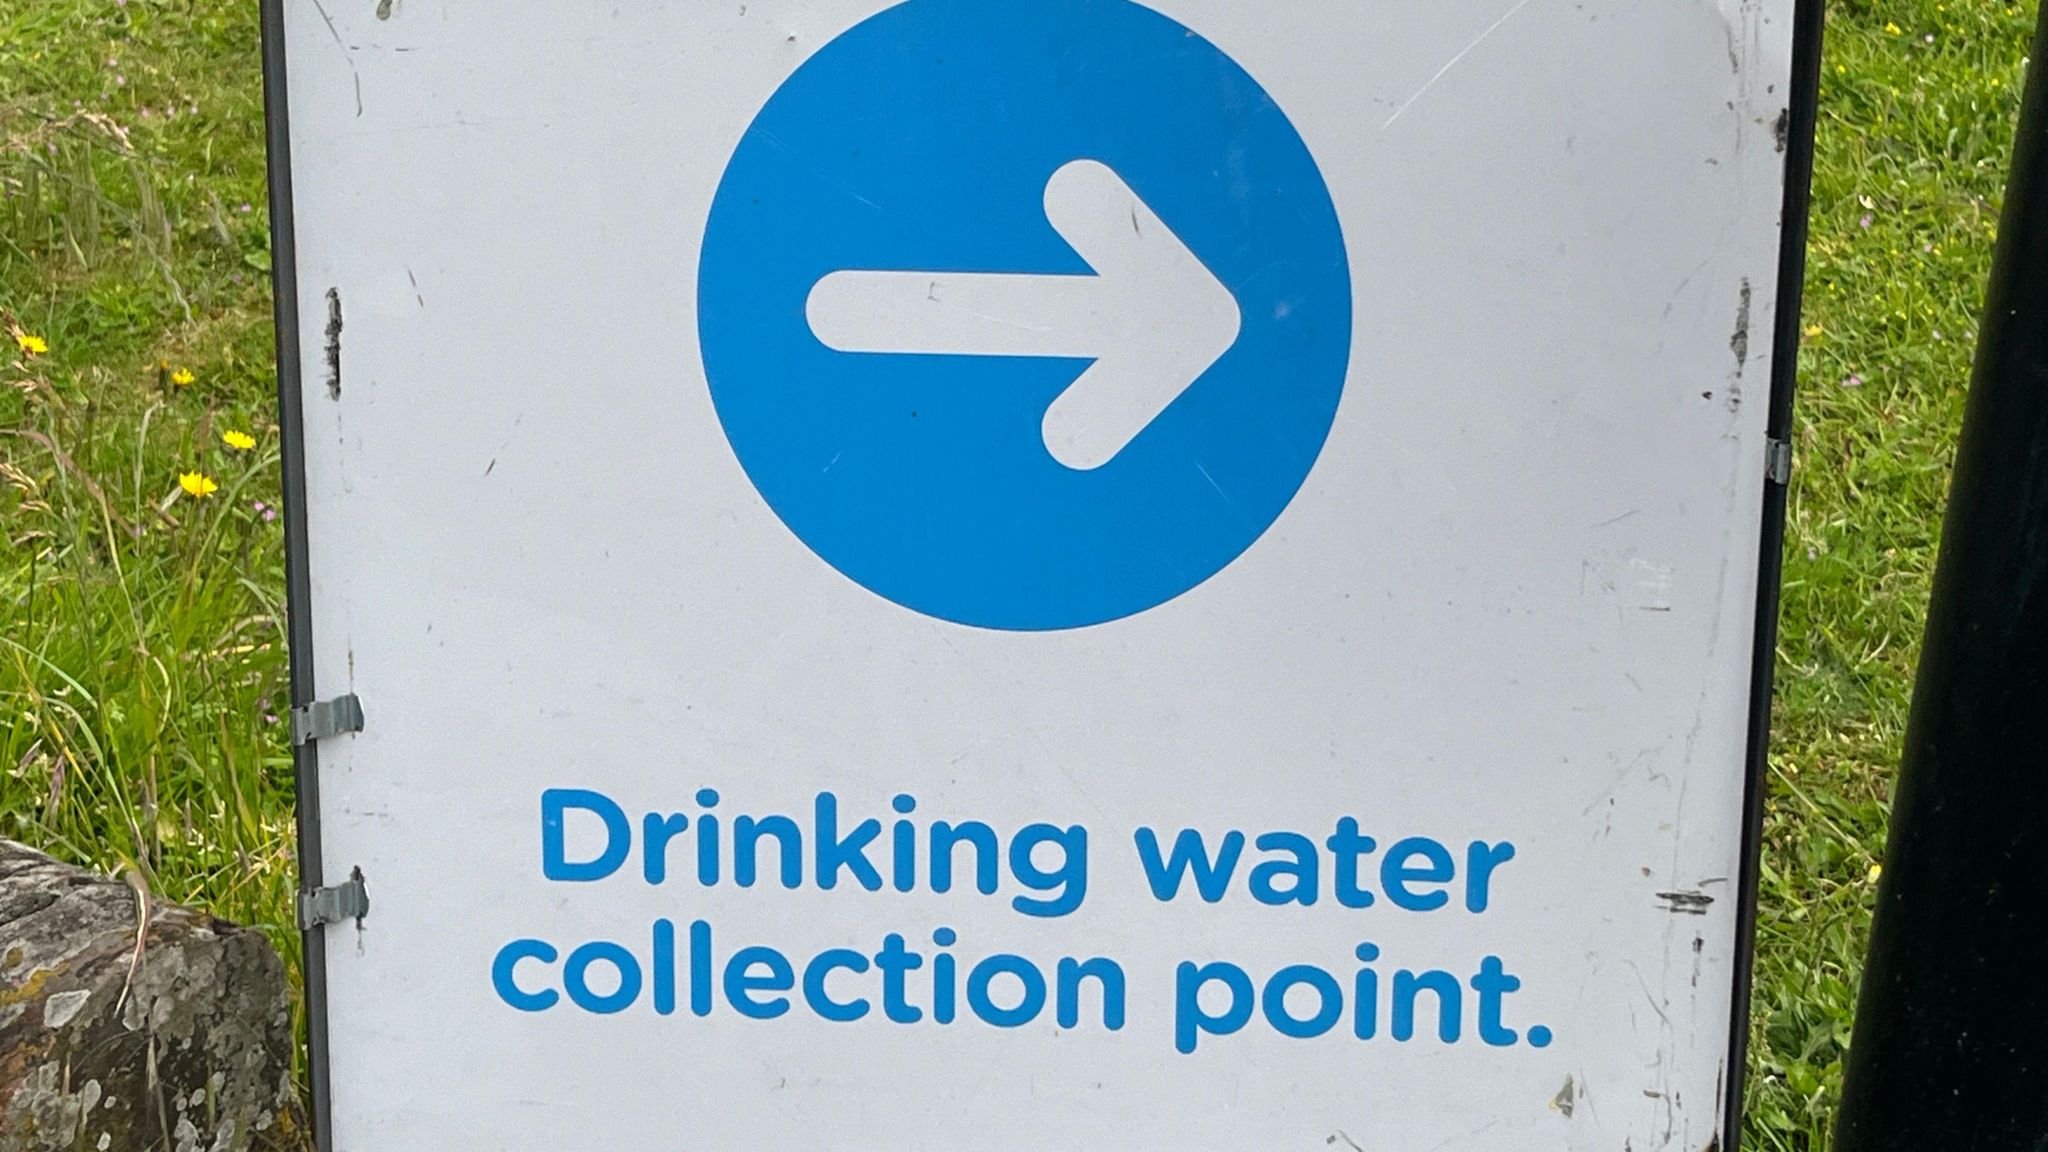 A drinking water collection point sign in Bramley